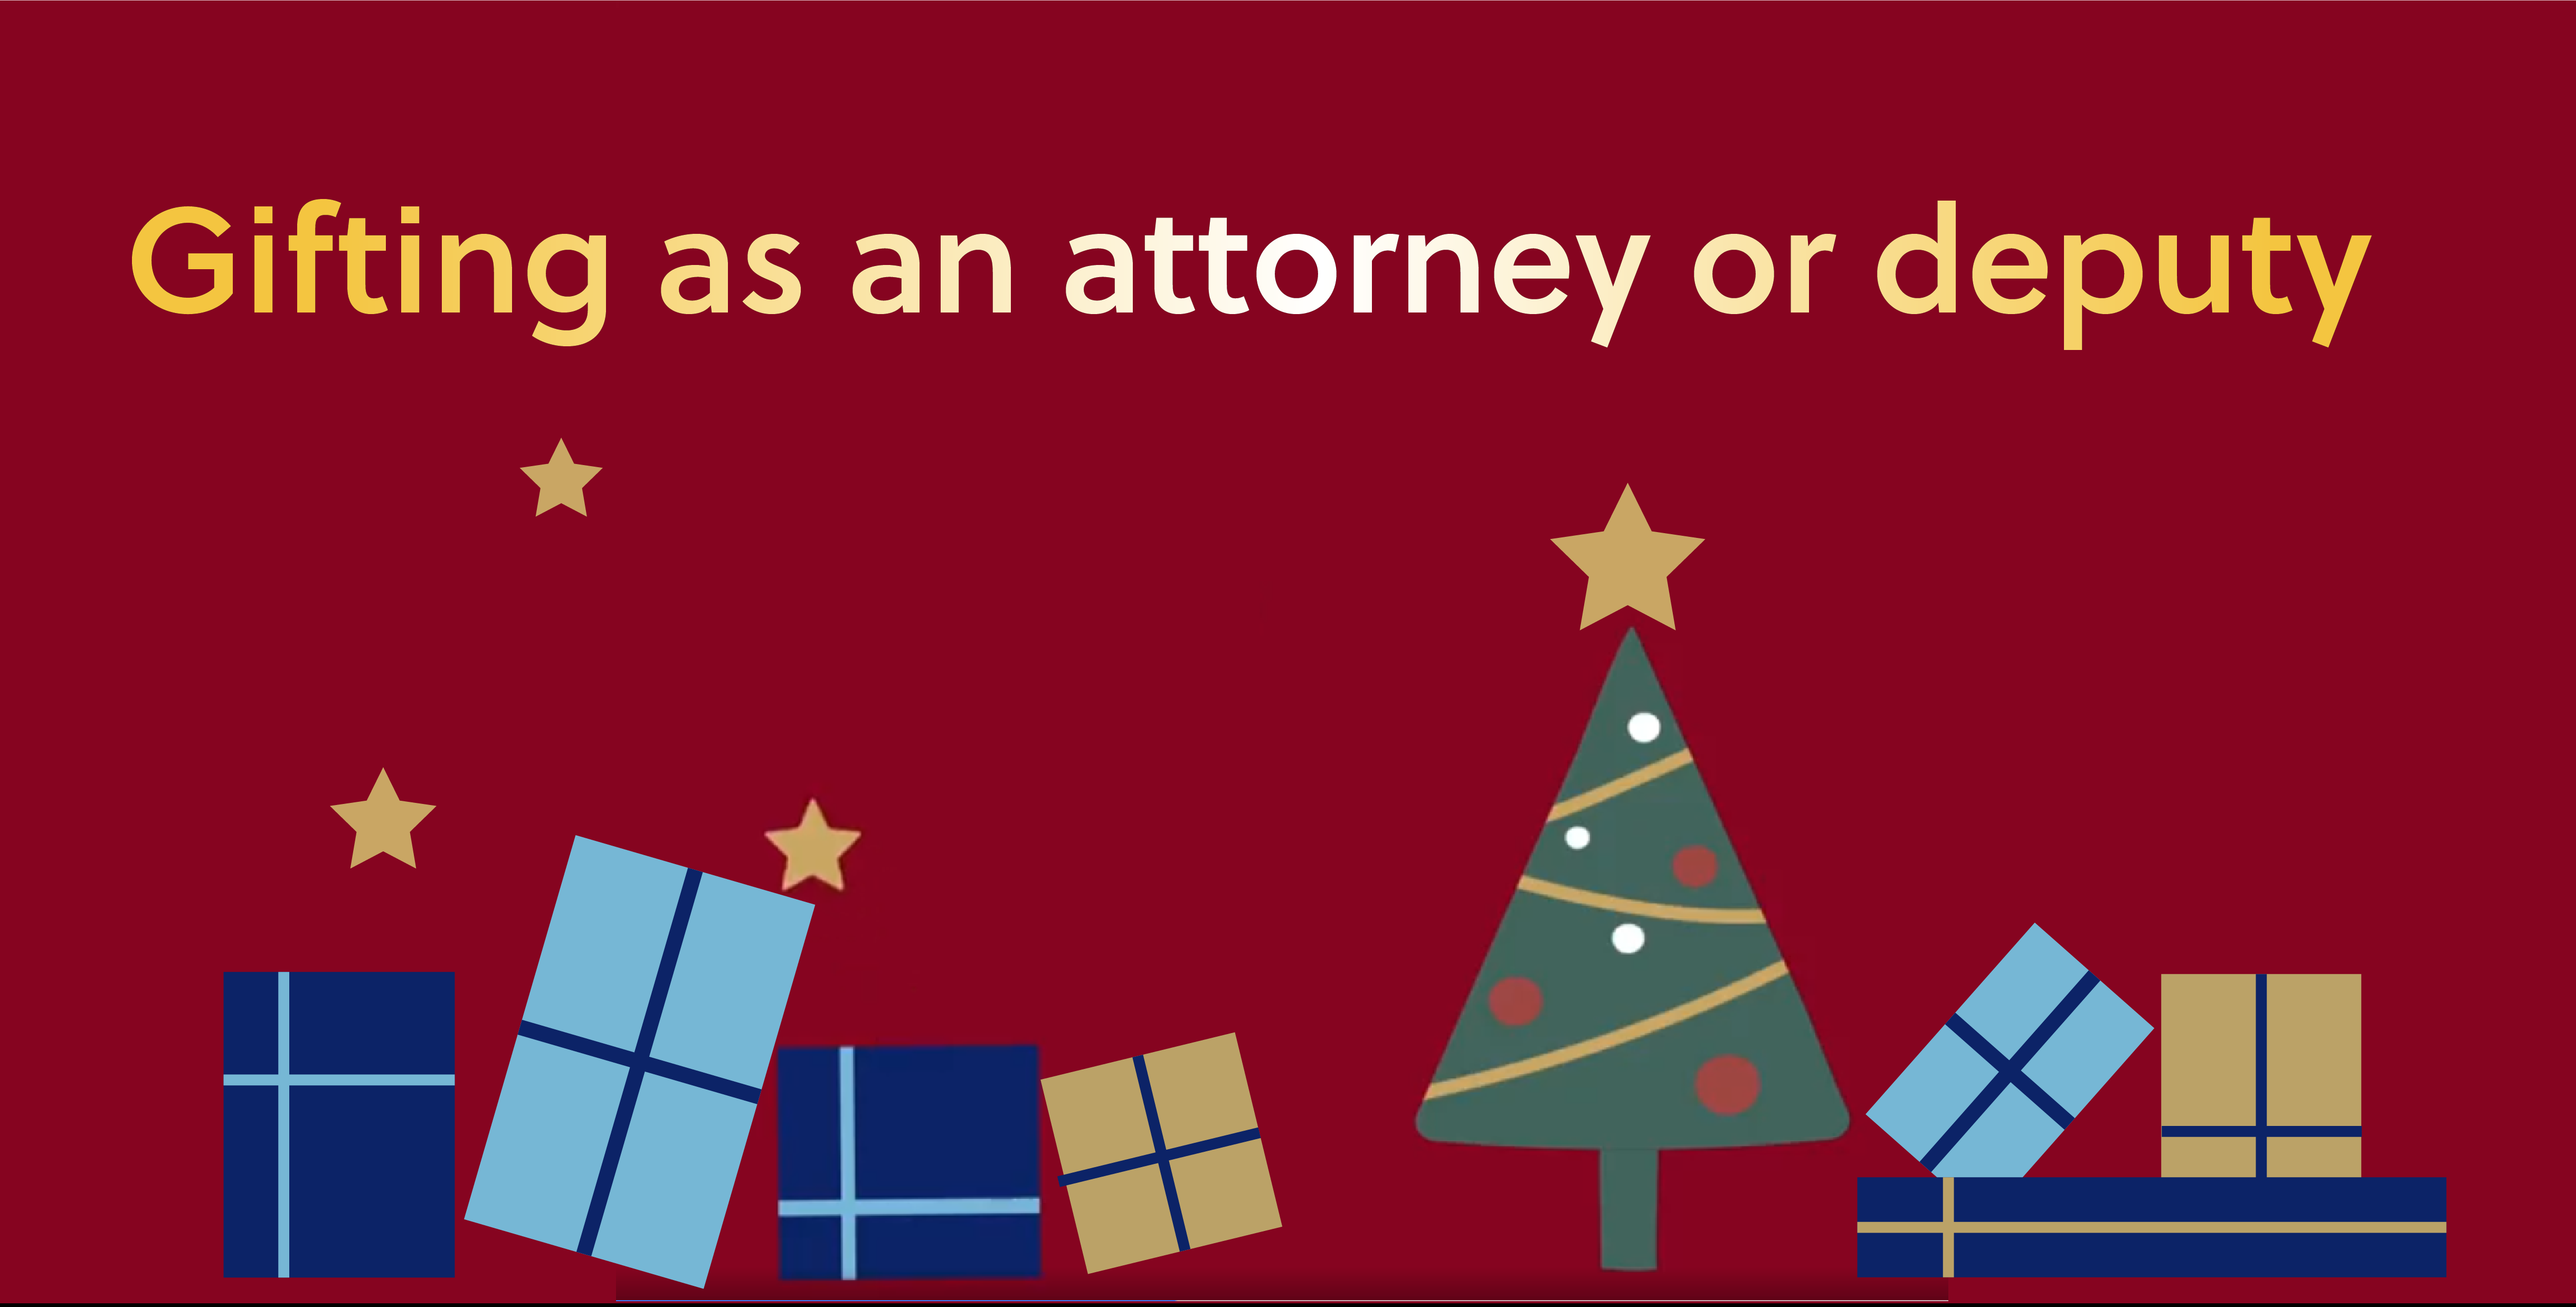 Making Gifts under a Lasting Power of Attorney (LPA)